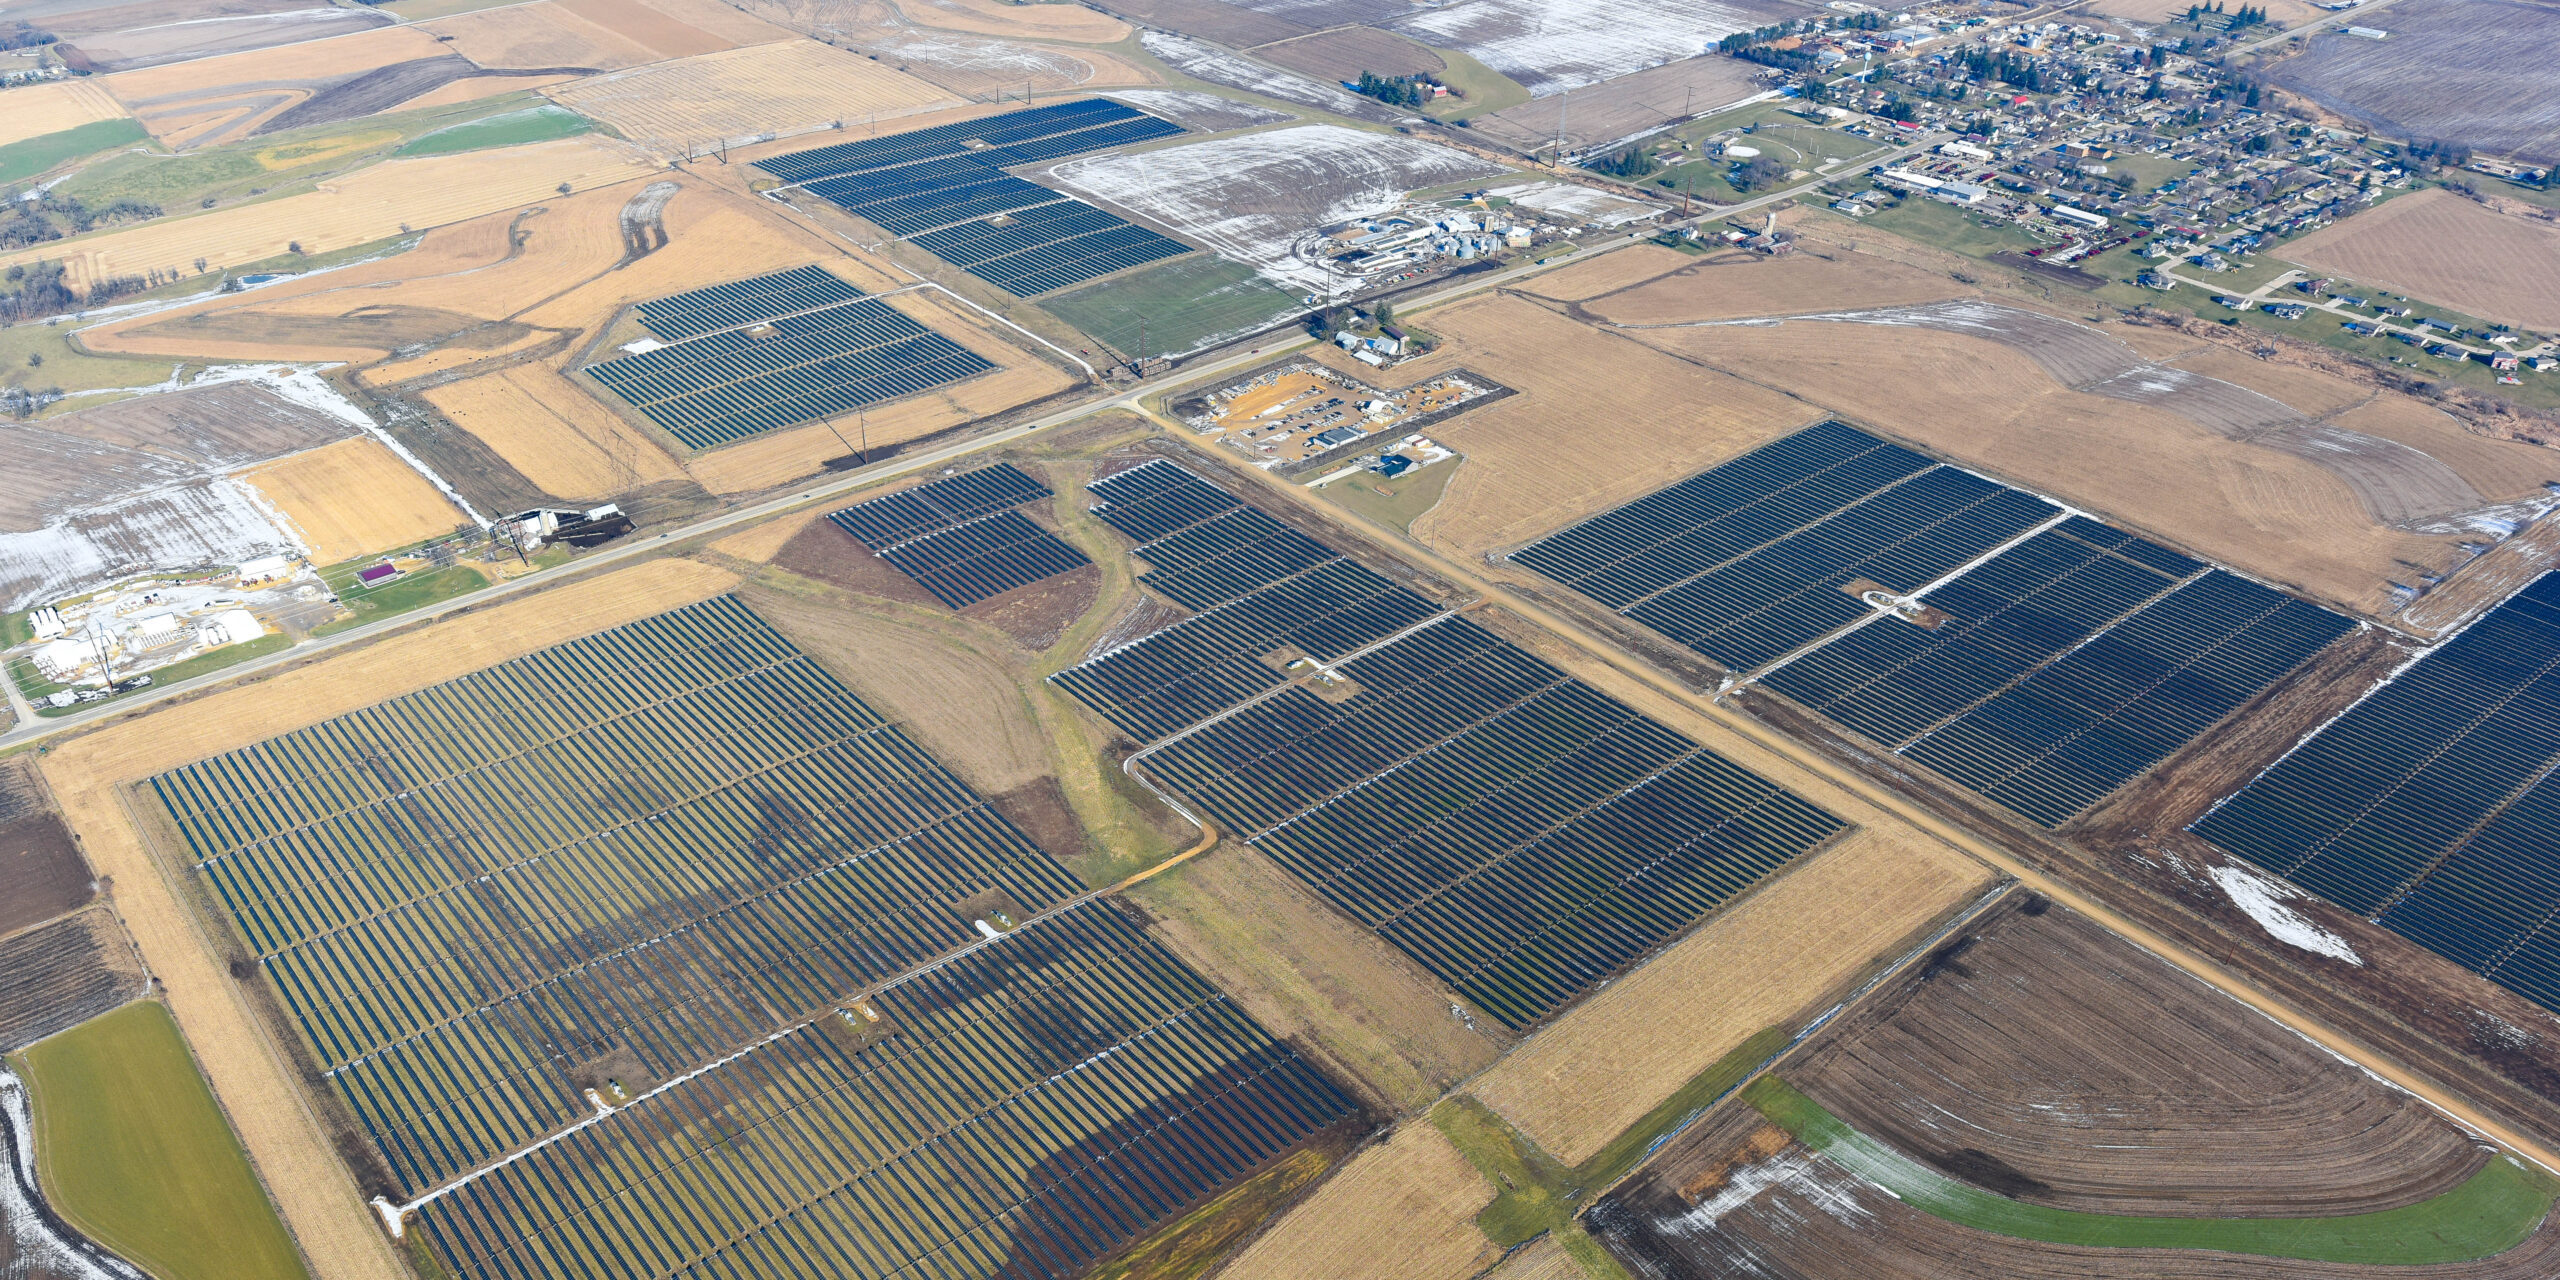 An aerial view of large blocks of solar panels installed in a rural area.